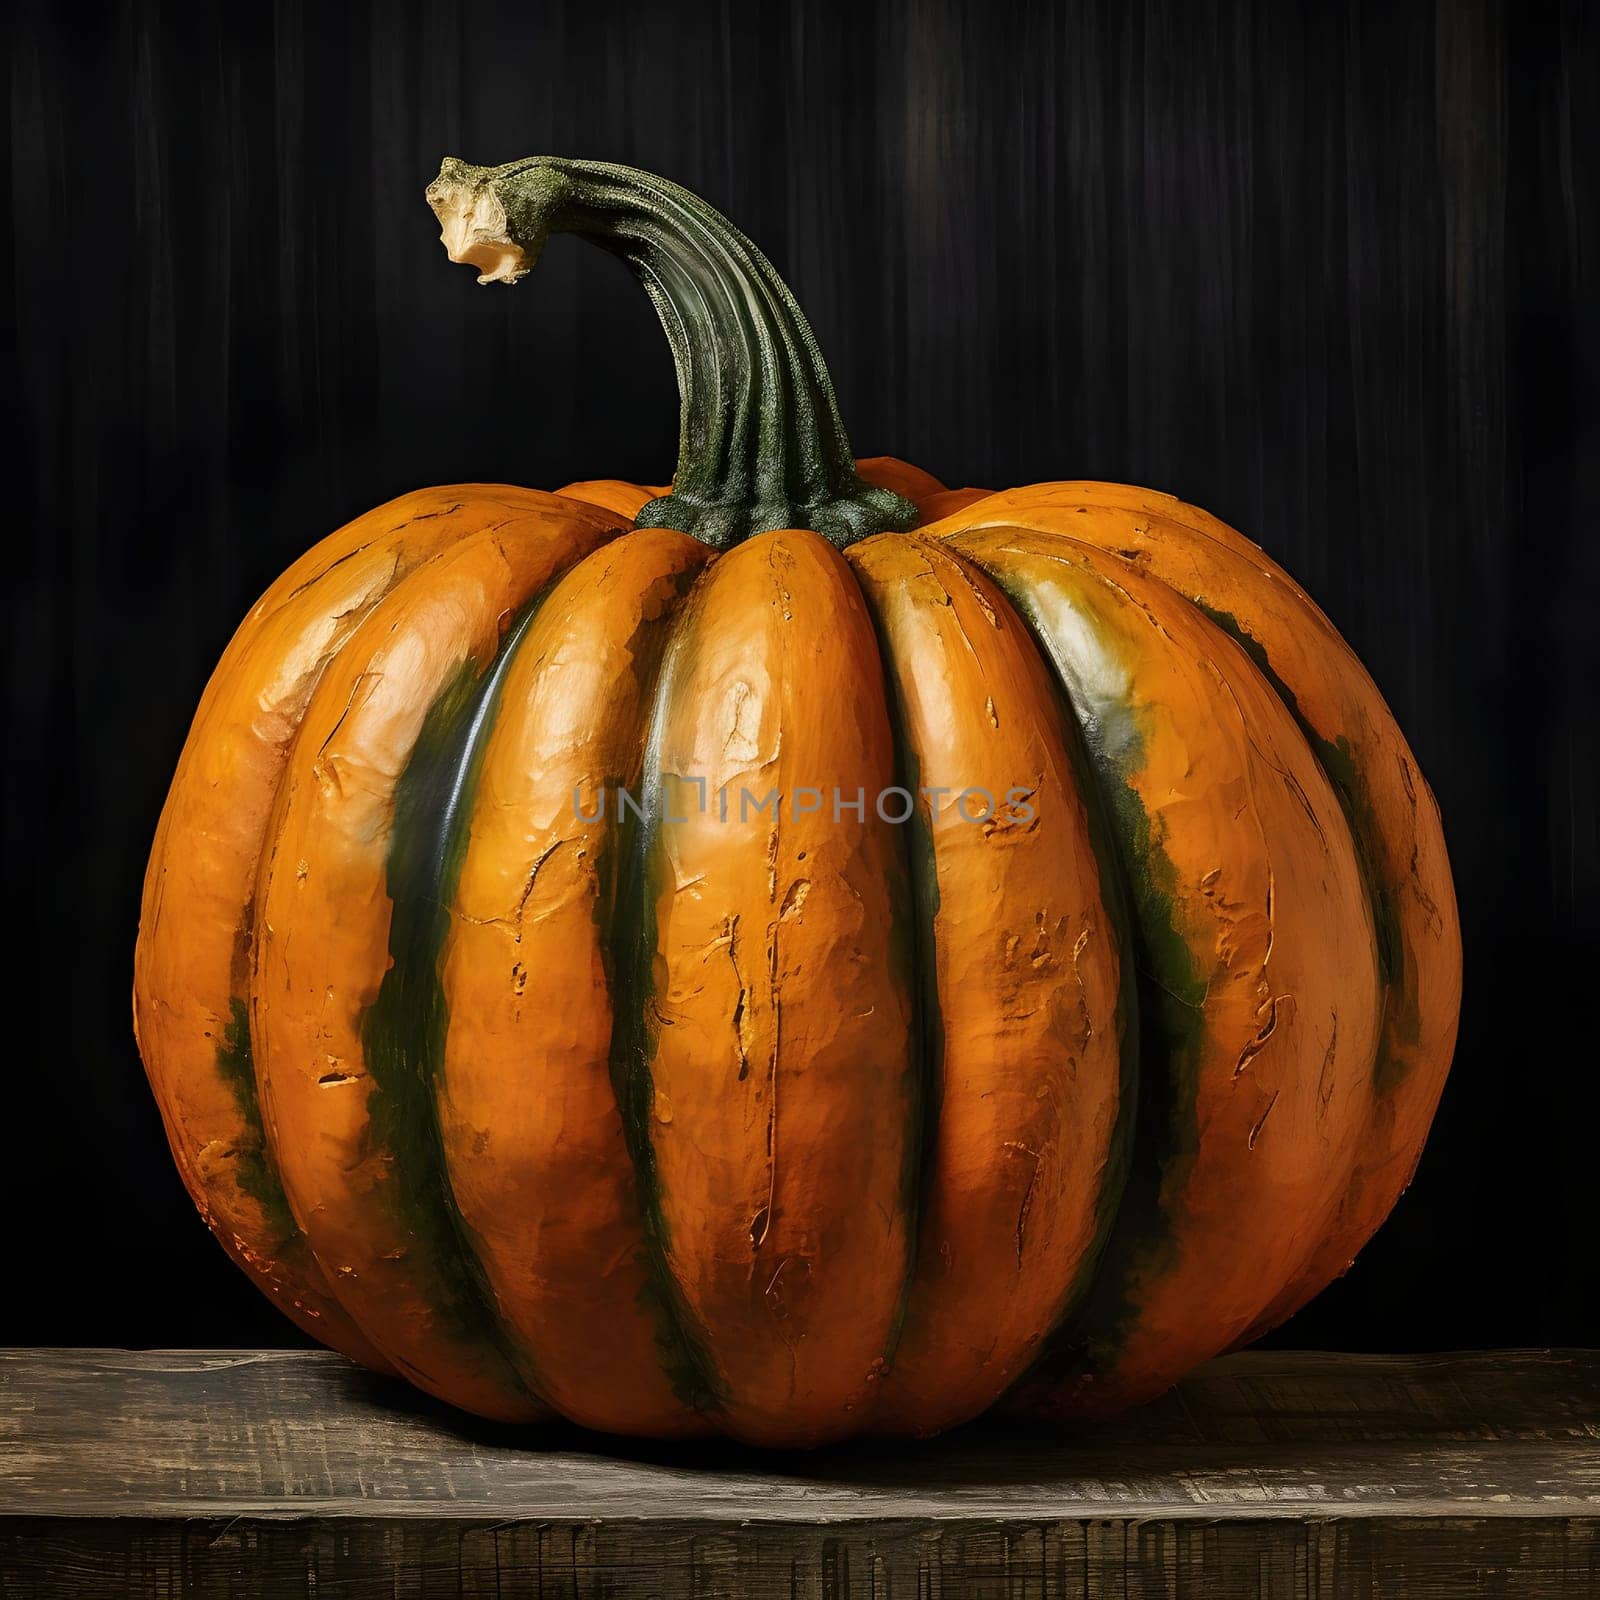 Painted with paint, watercolor pumpkin on a dark background. Pumpkin as a dish of thanksgiving for the harvest. An atmosphere of joy and celebration.